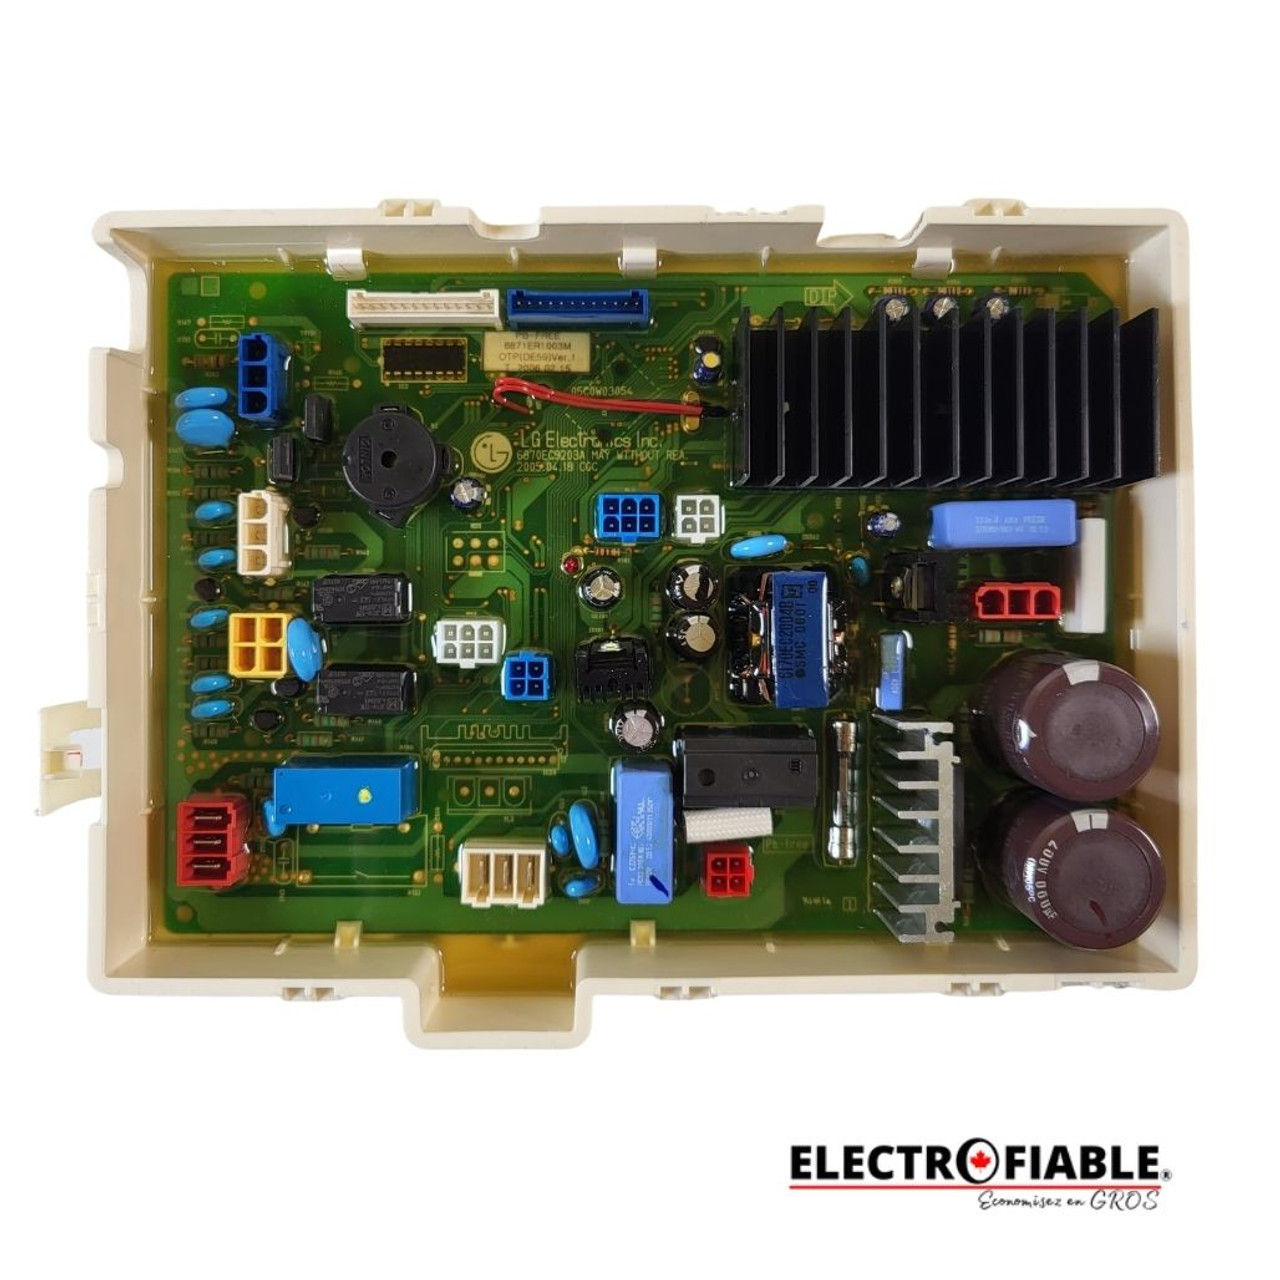 6871ER1003M Control board for LG washer